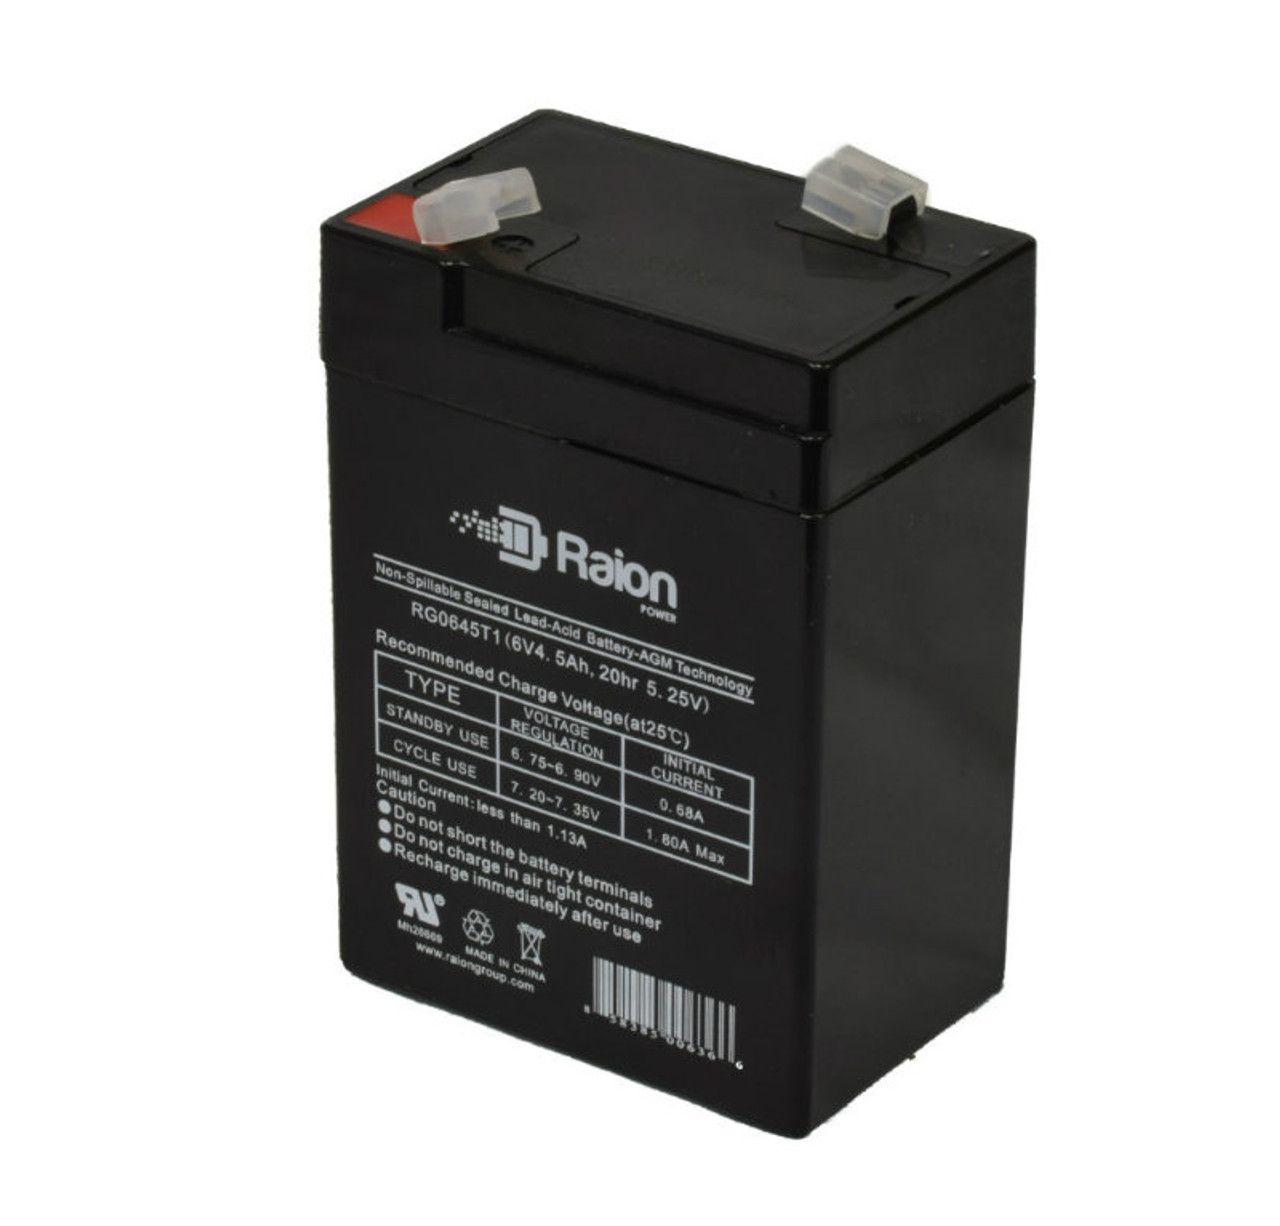 Raion Power RG0645T1 6V 4.5Ah Replacement Battery Cartridge for Baxter Healthcare Bentley Oxygen